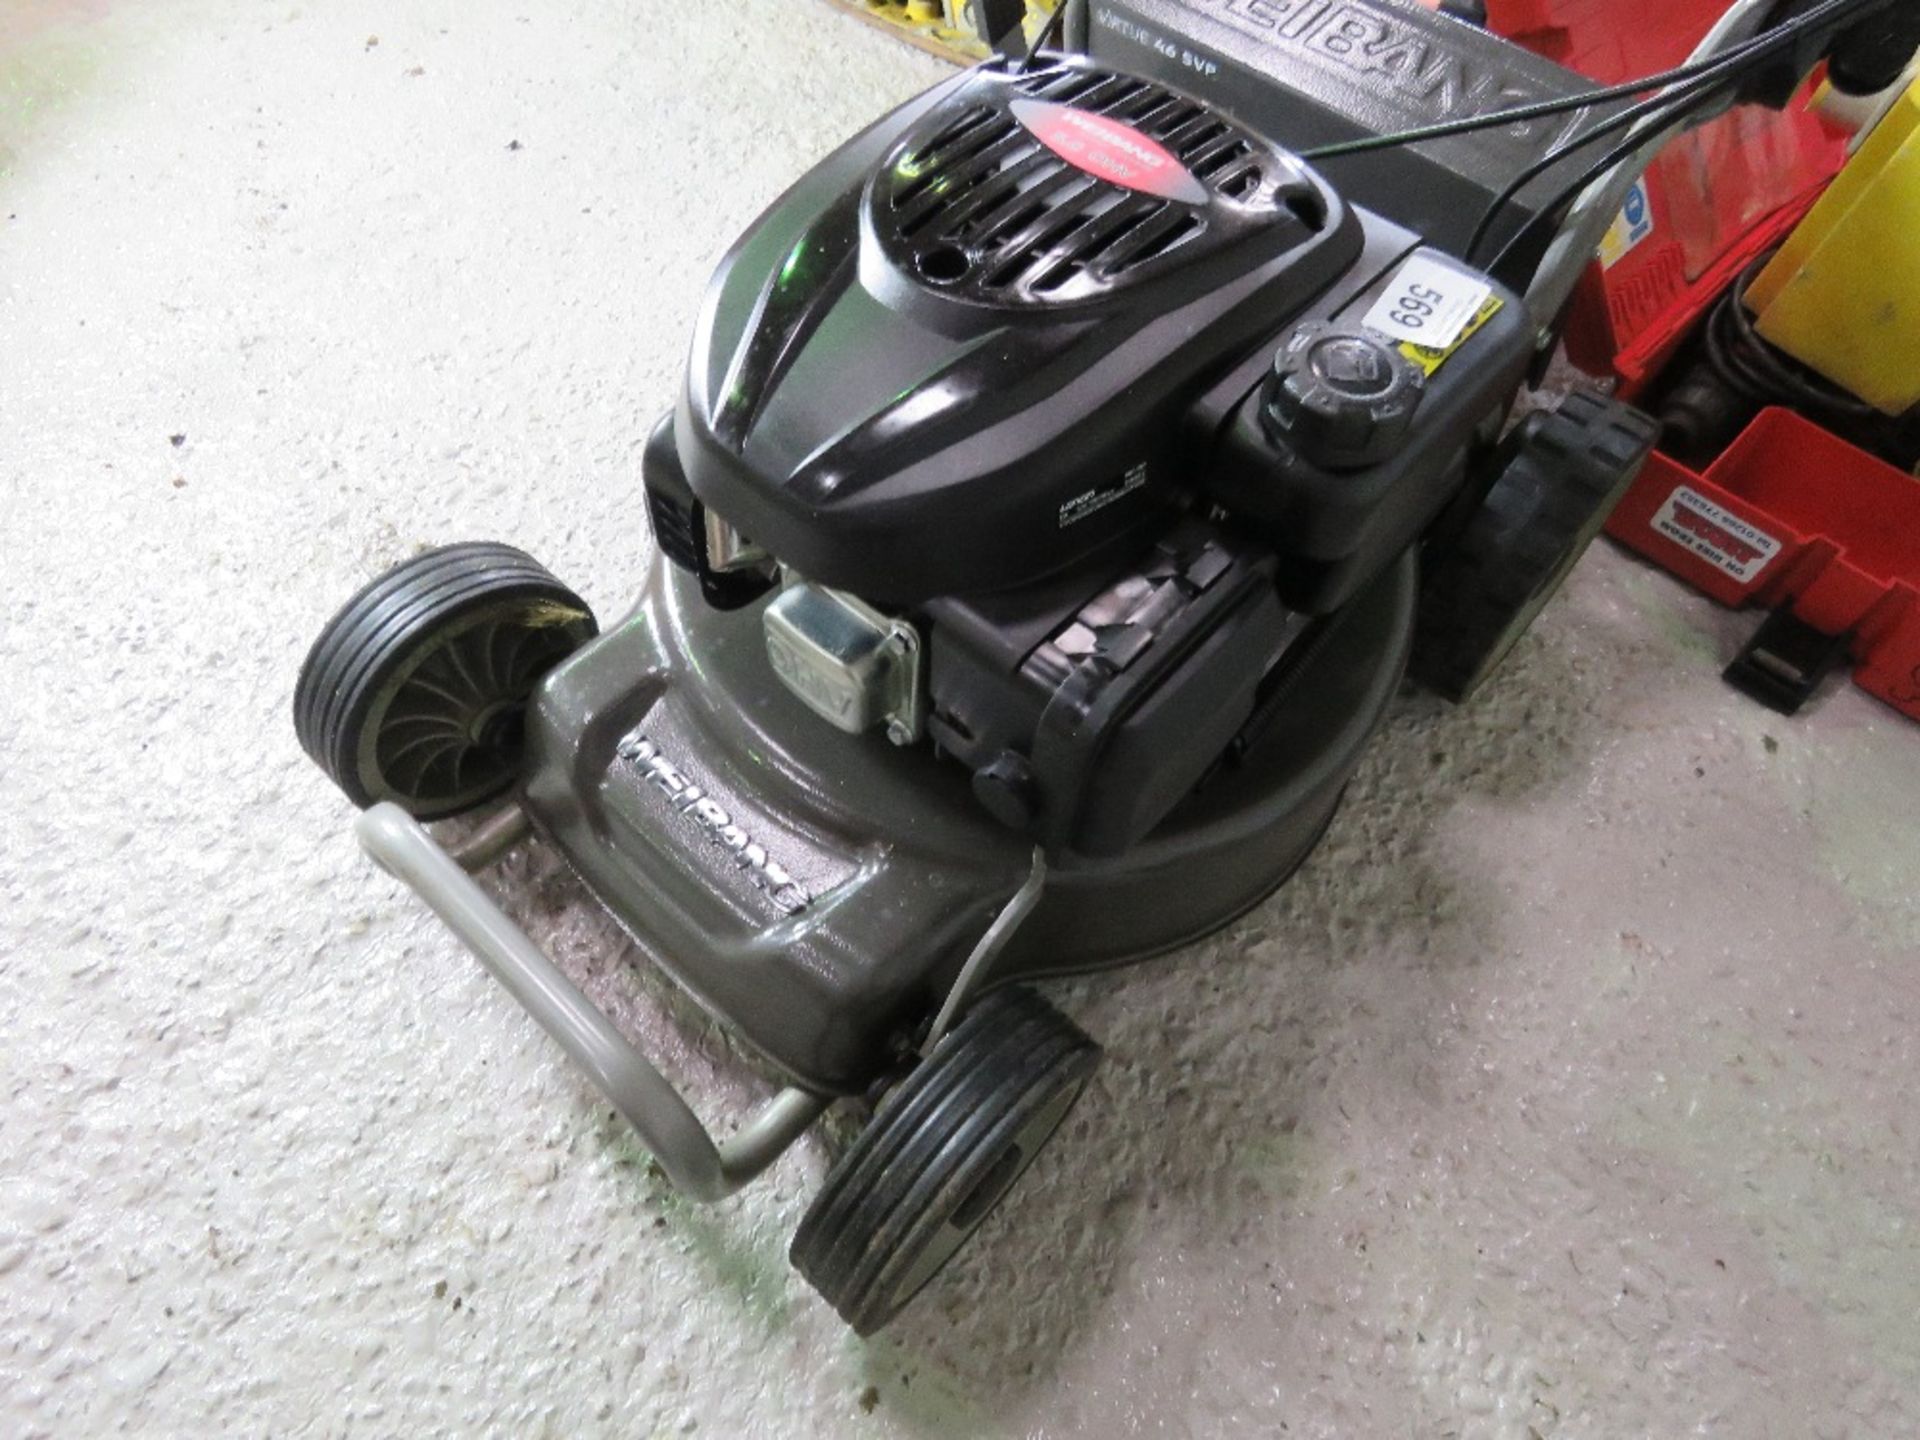 WEIBANG SELF DRIVE MOWER, YEAR 2020, LITTLE SIGN OF USE. WHEN TESTED WAS SEEN TO RUN AND DRIVE AND B - Image 2 of 5